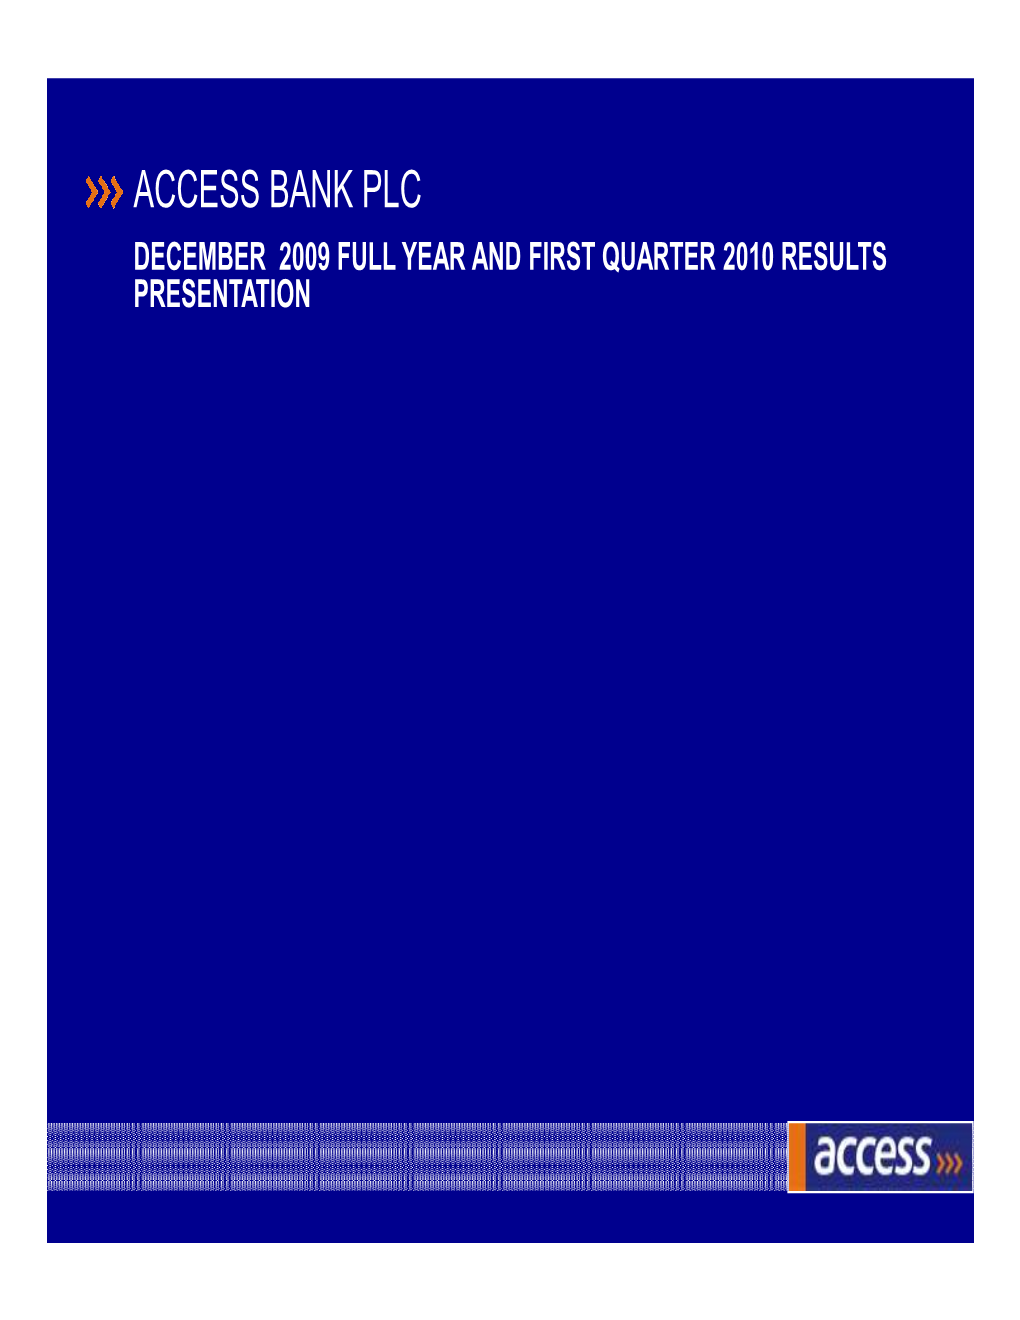 ACCESS BANK PLC DECEMBER 2009 FULL YEAR and FIRST QUARTER 2010 RESULTS PRESENTATION Outline